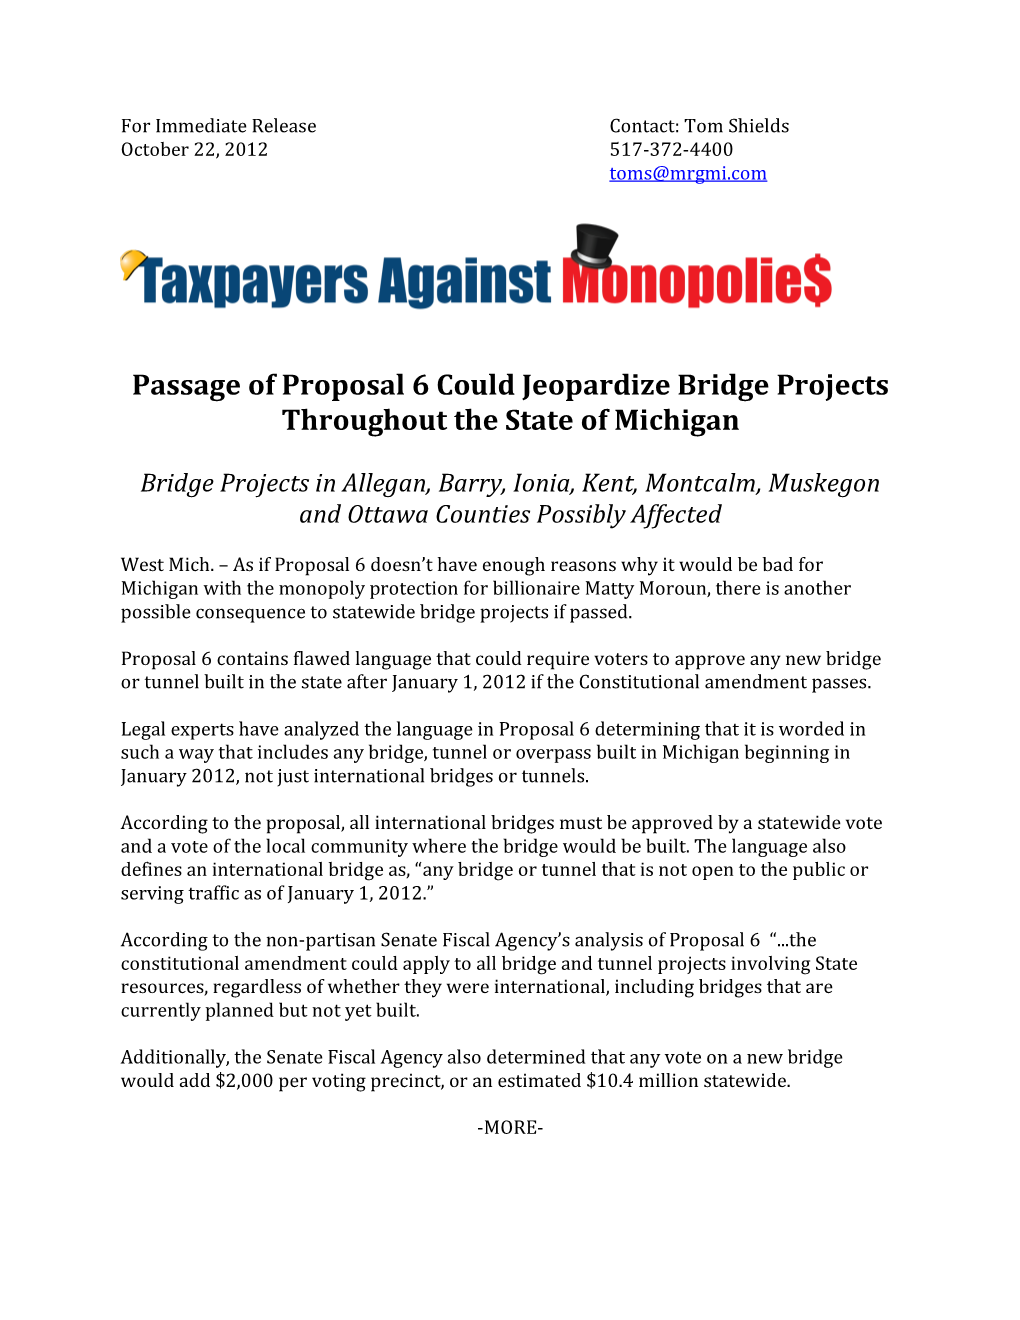 Passage of Proposal 6 Could Jeopardize Bridge Projects Throughout the State of Michigan